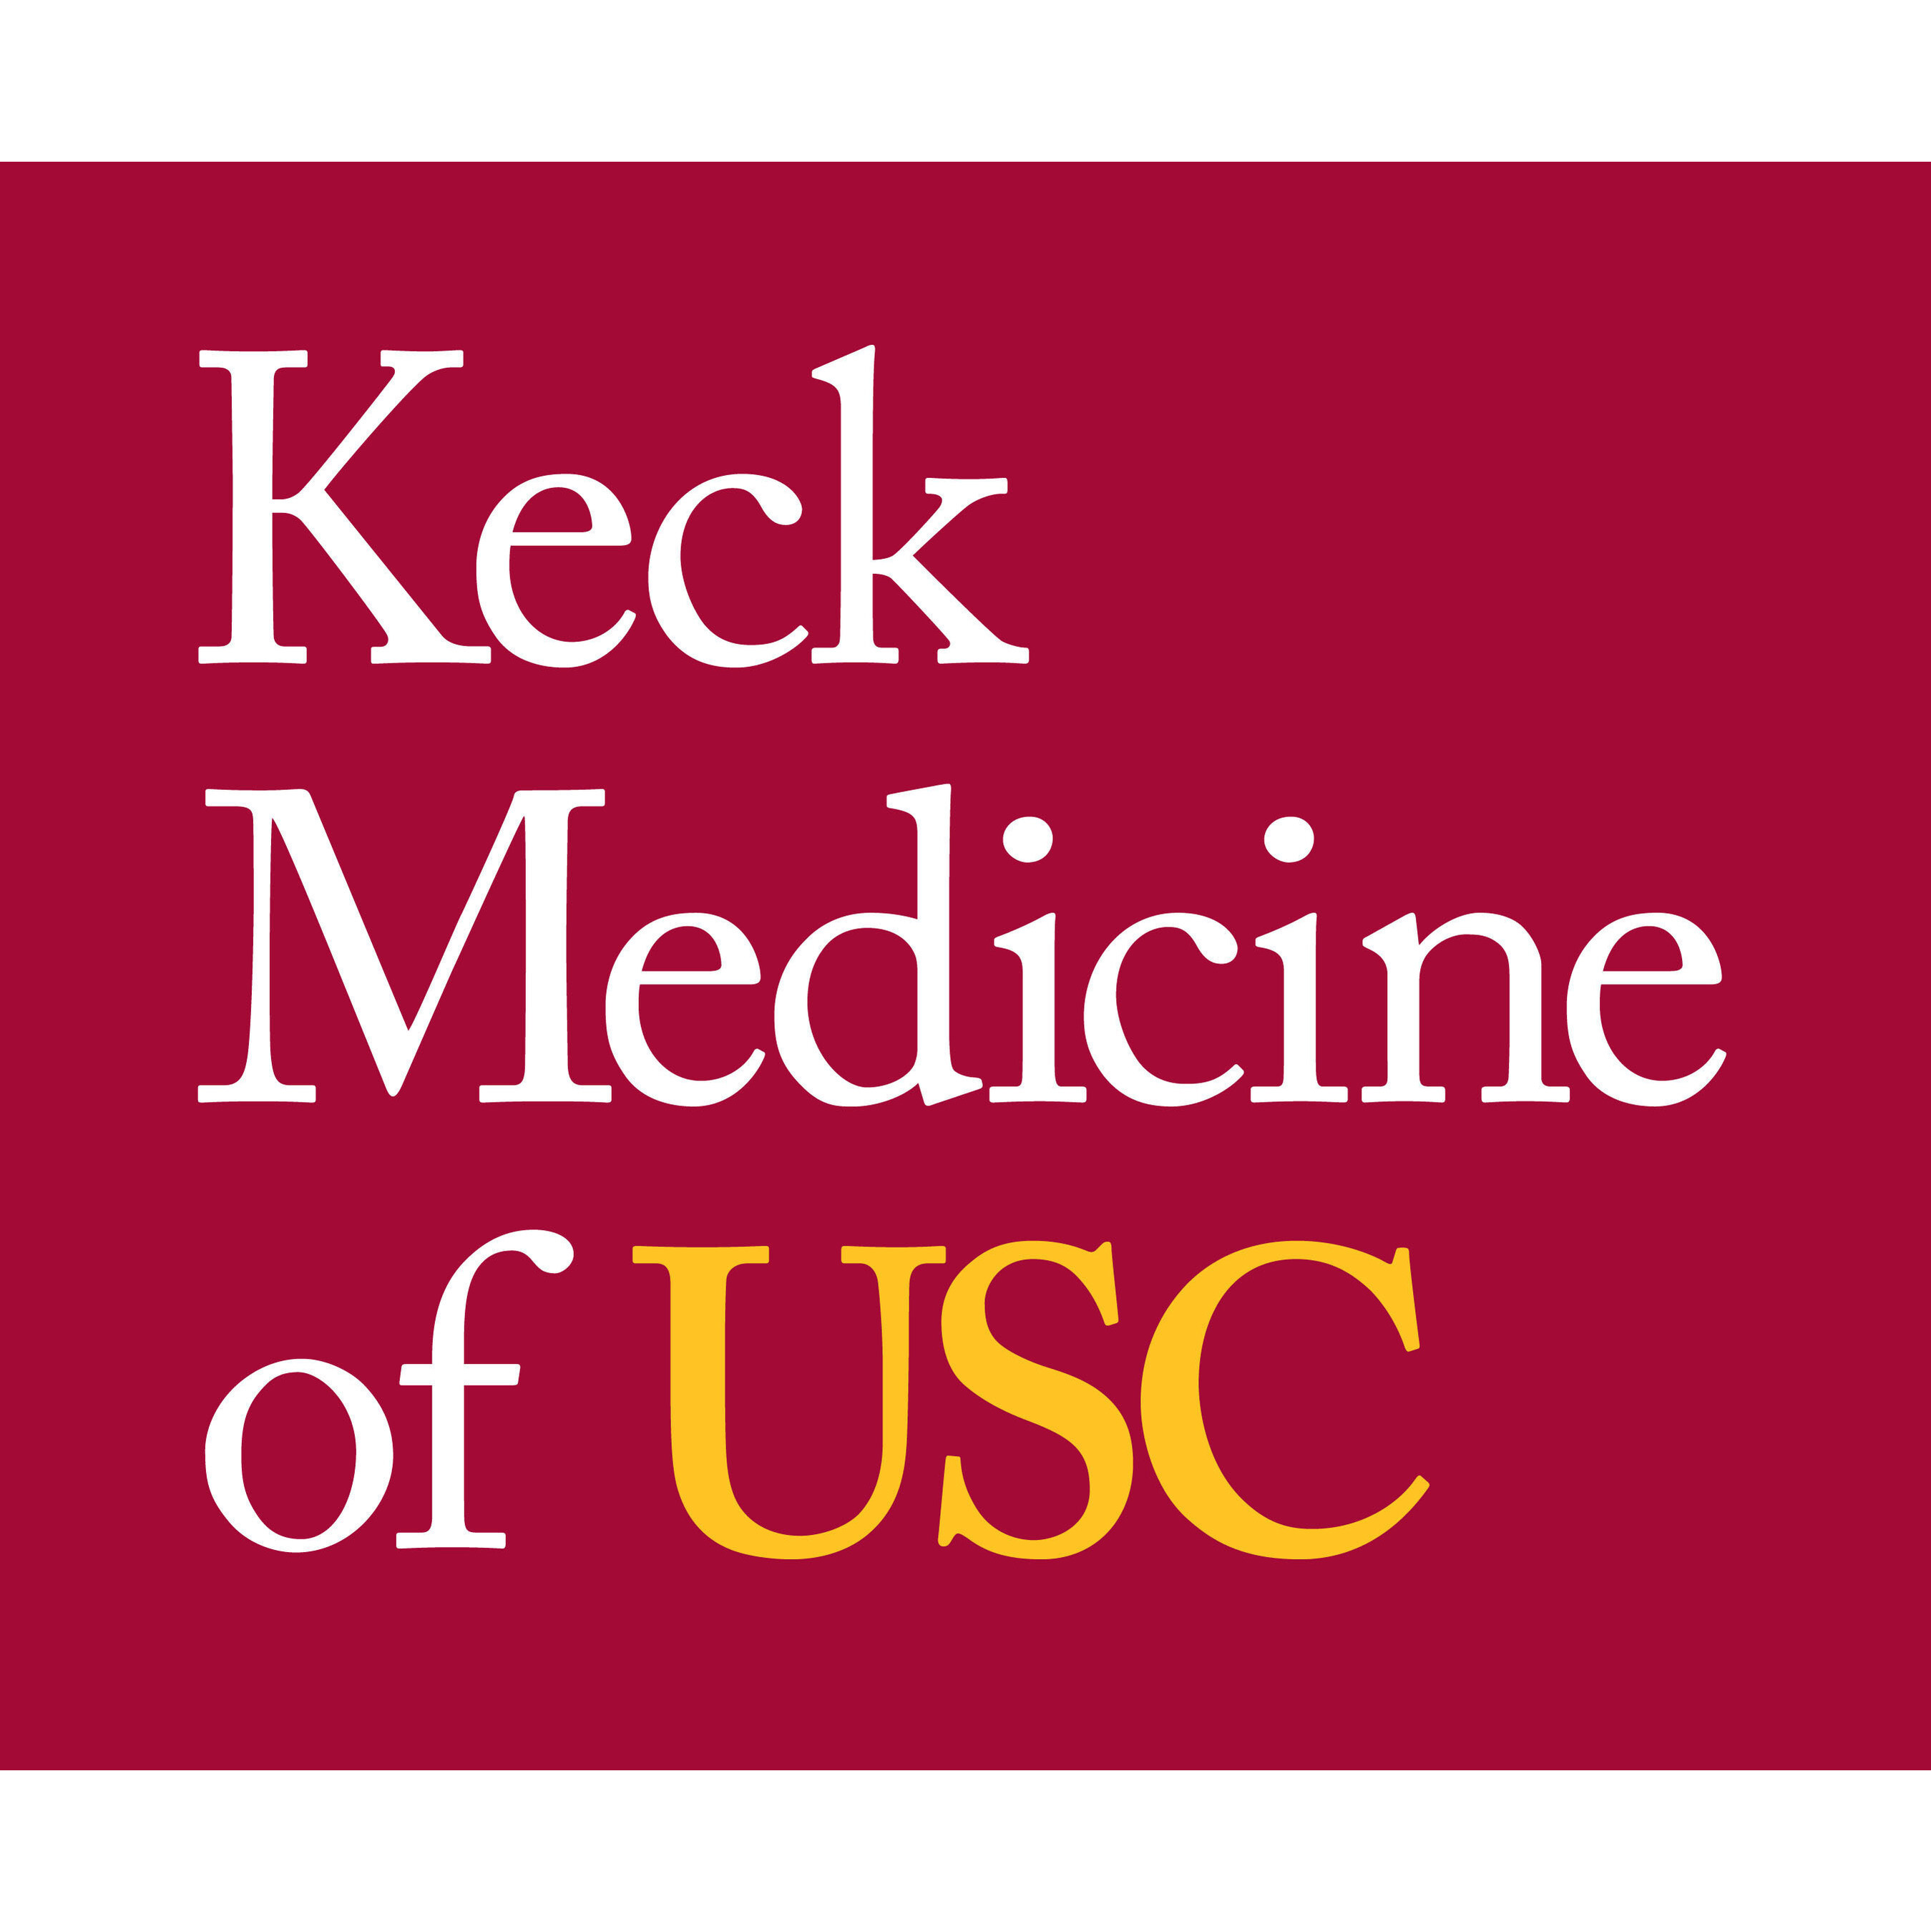 6 Reasons Why Team Sports Are Good for Your Health - Keck Medicine of USC